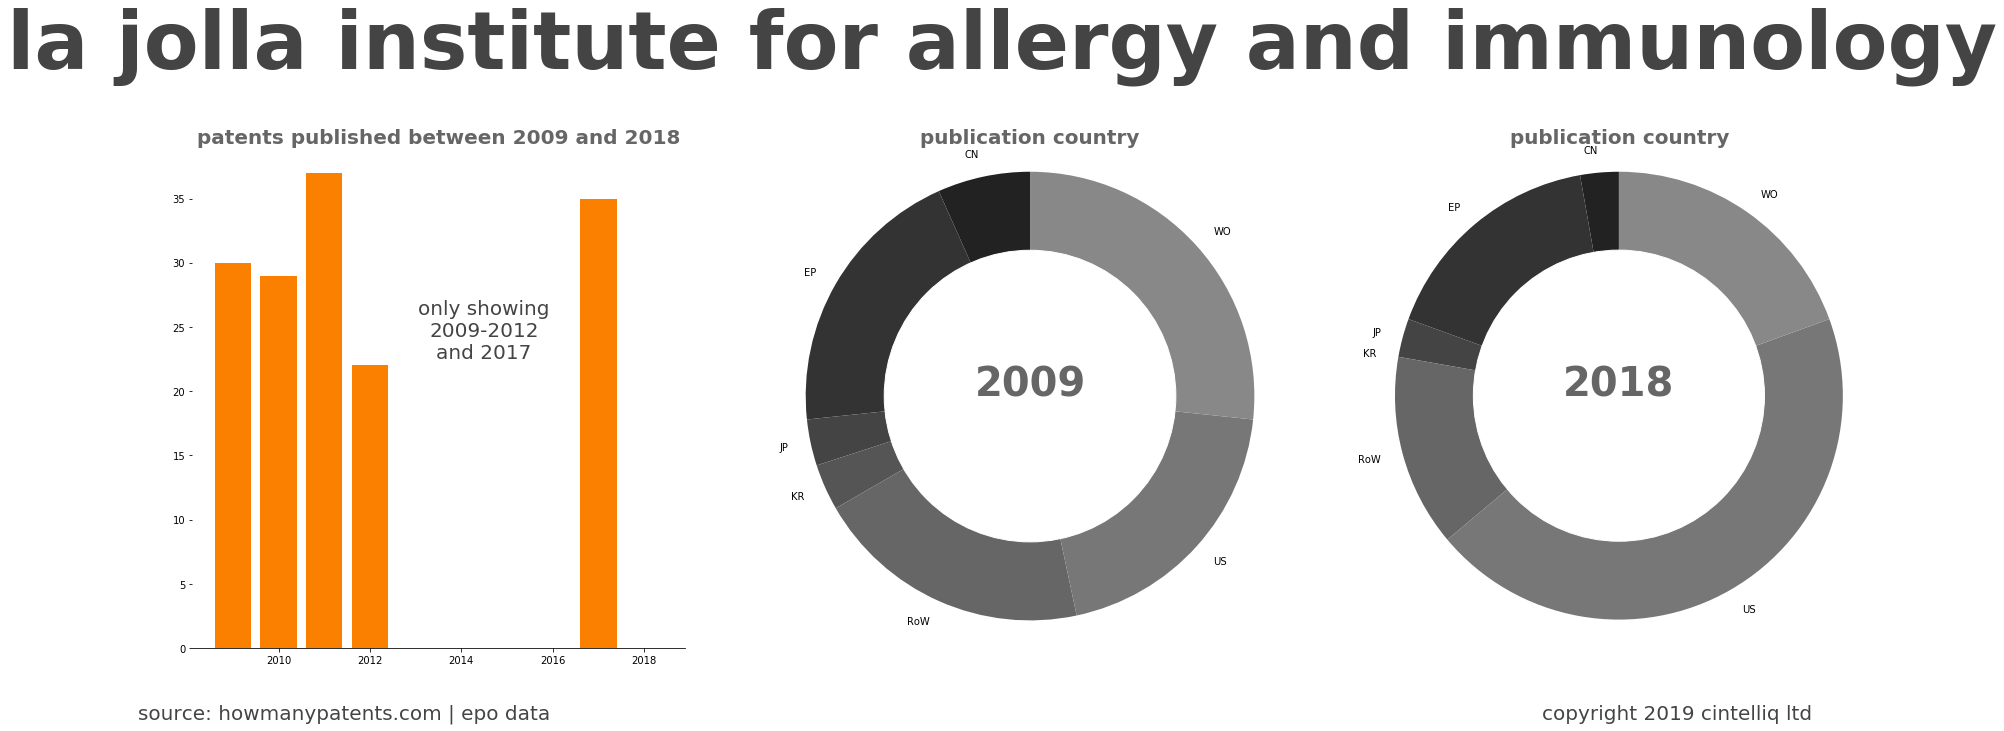 summary of patents for La Jolla Institute For Allergy And Immunology